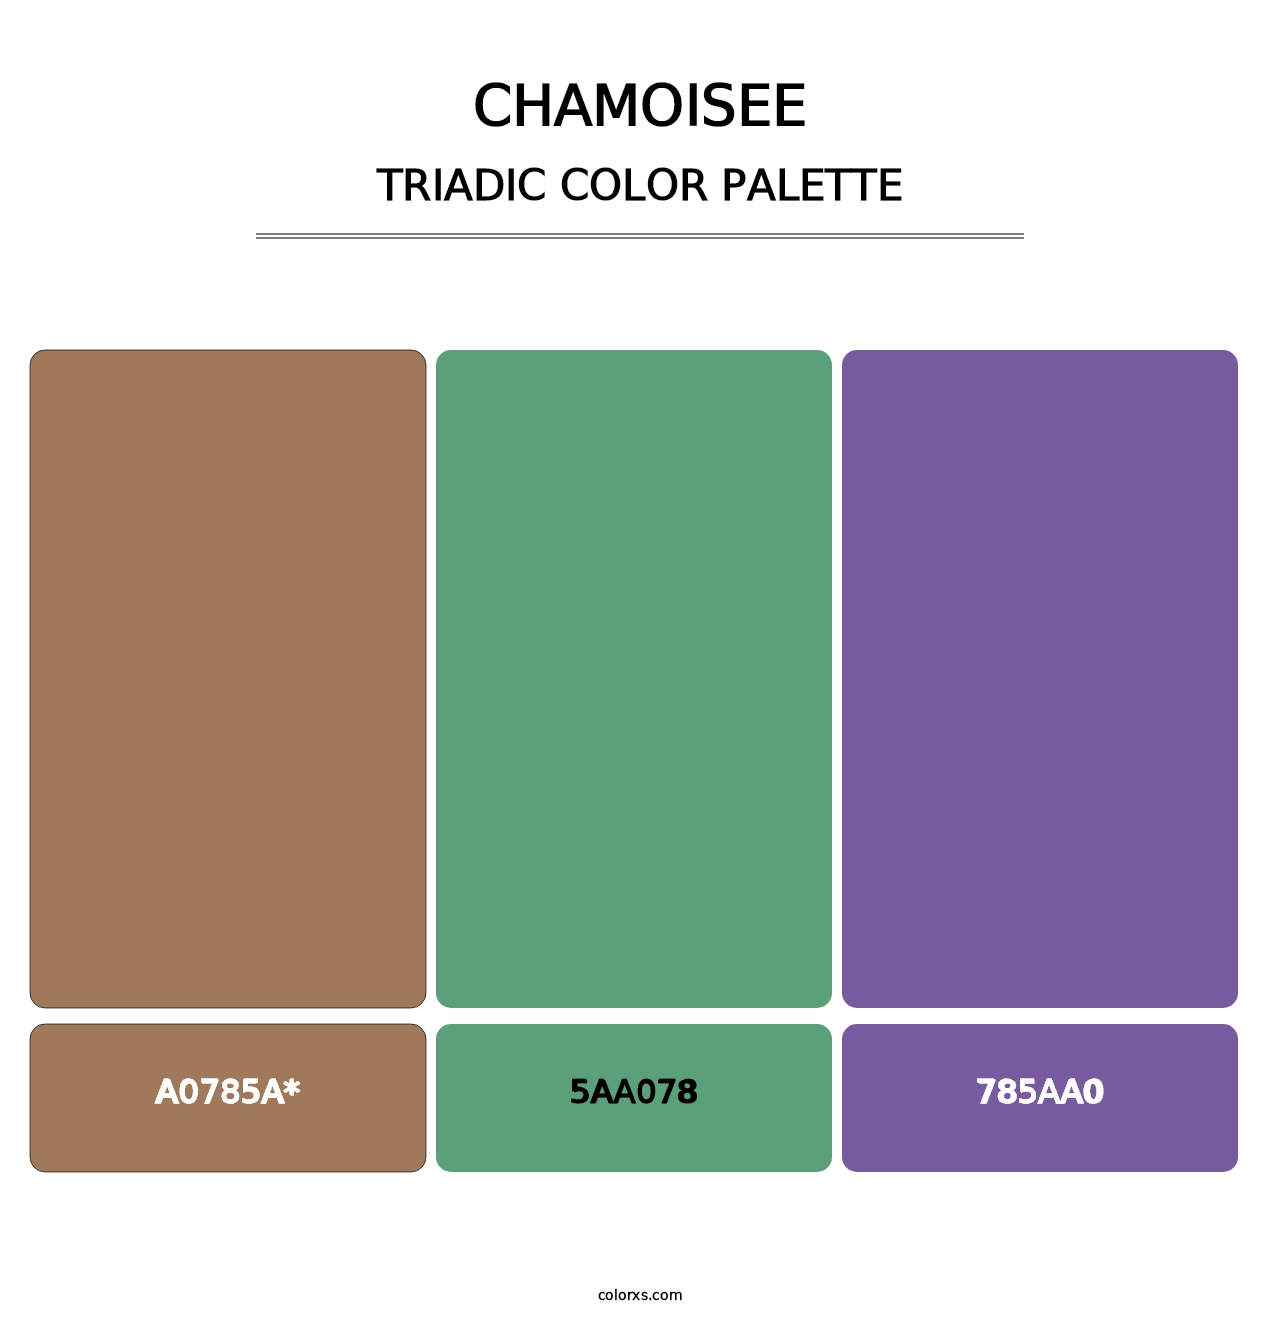 Chamoisee - Triadic Color Palette